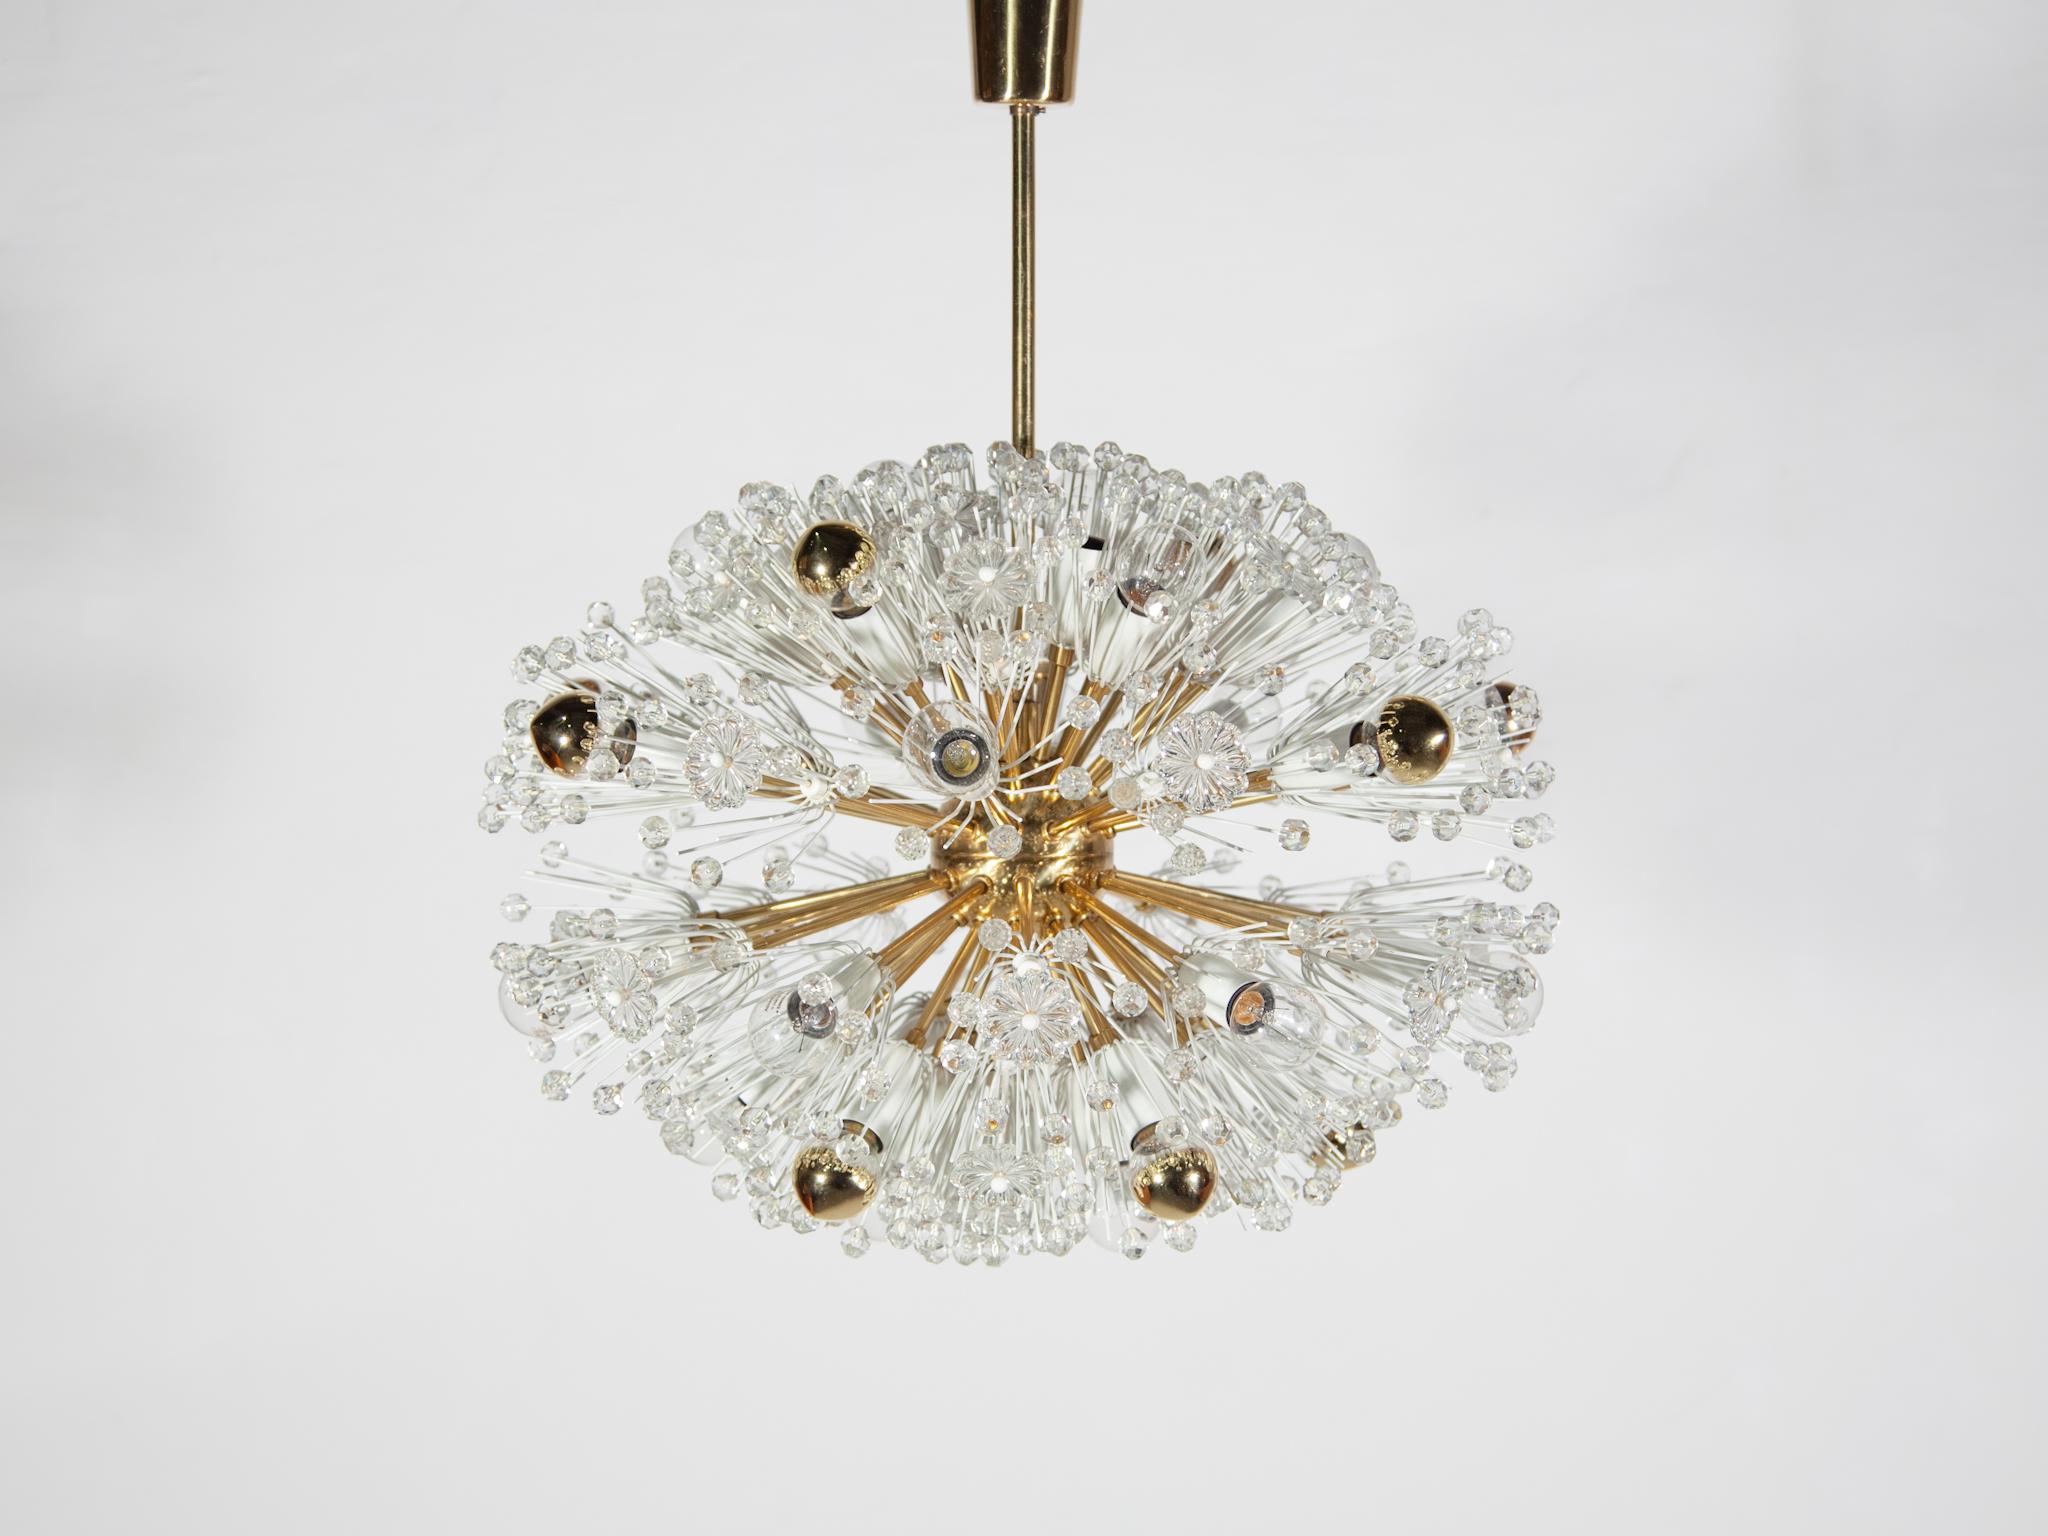 Spectacular, 1950s Emil Stejnar chandelier for Rupert Nikoll, Austria. This sparkling orb is one of the larger versions of this eclips design. The chandelier consists of a brass body and arms with white enameled socket covers each surrounded by